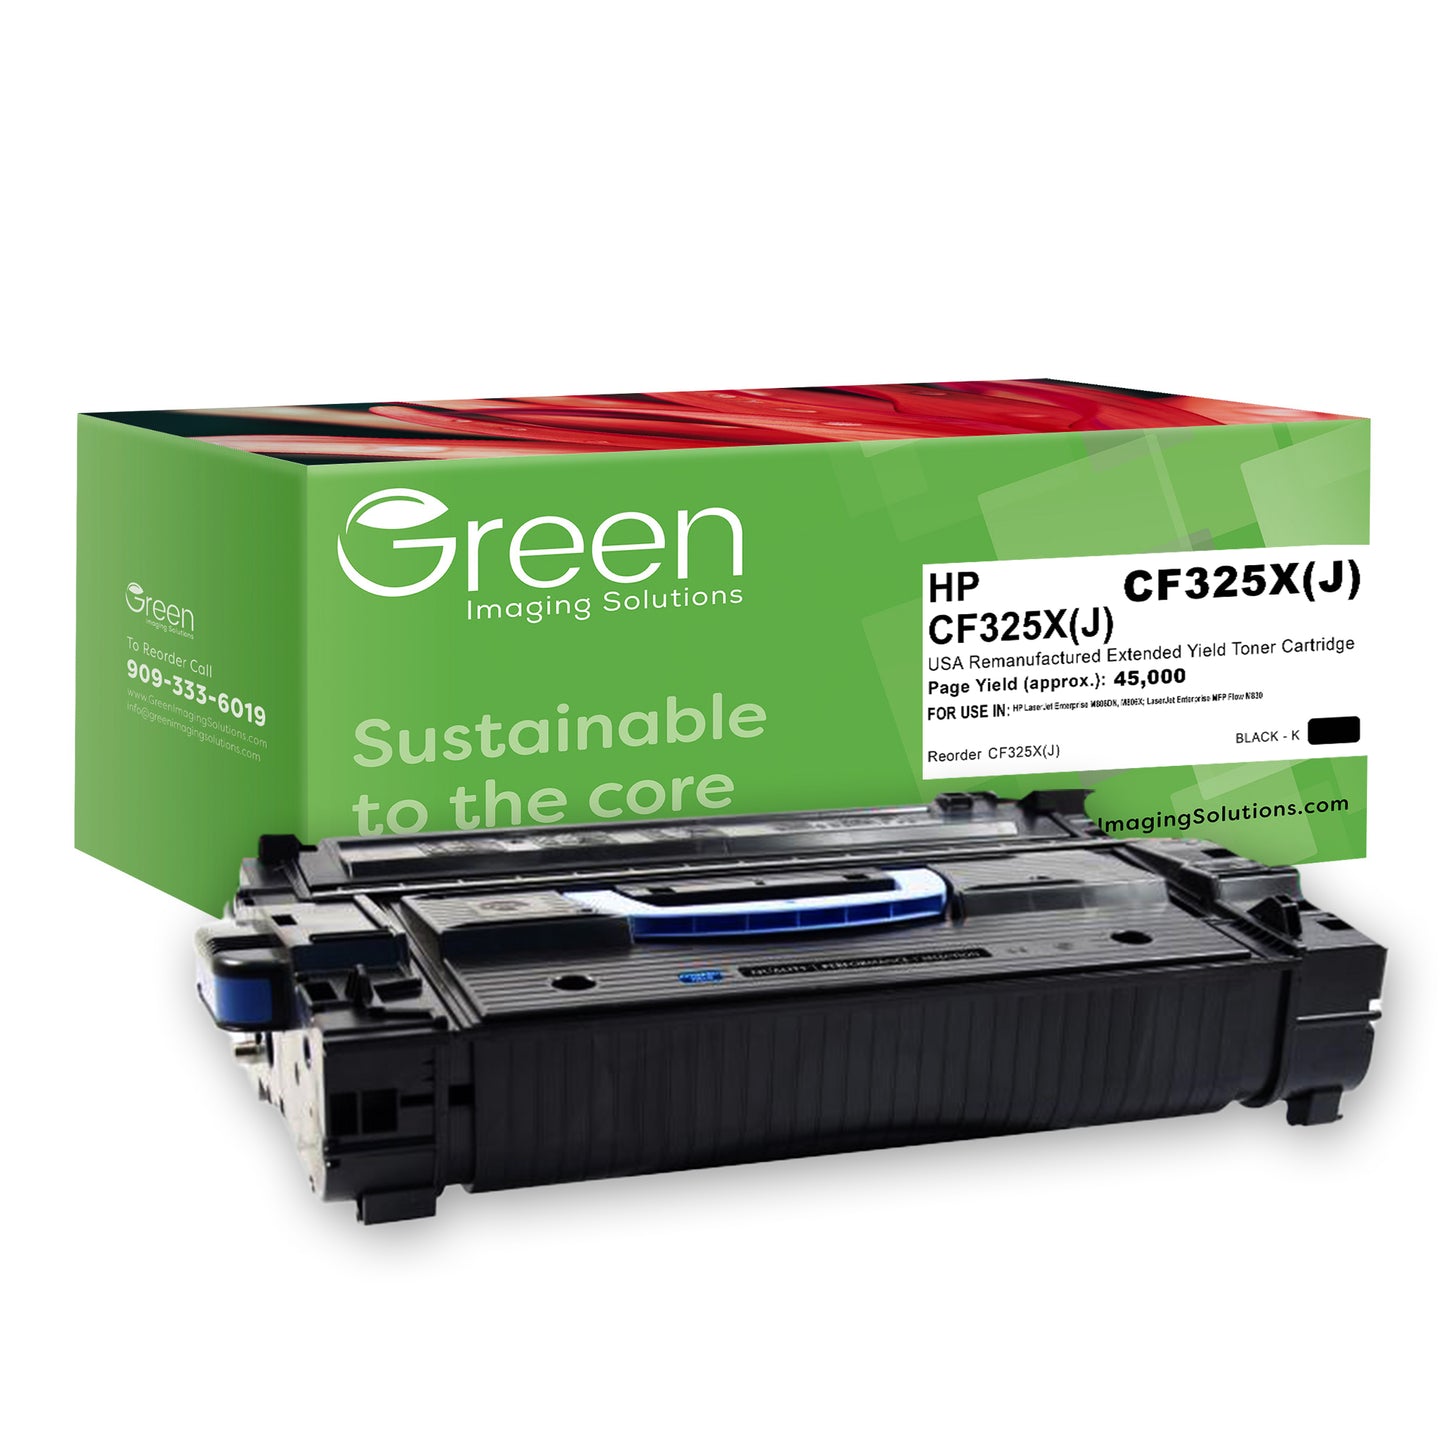 GIS USA Remanufactured Extended Yield Toner Cartridge for HP CF325X